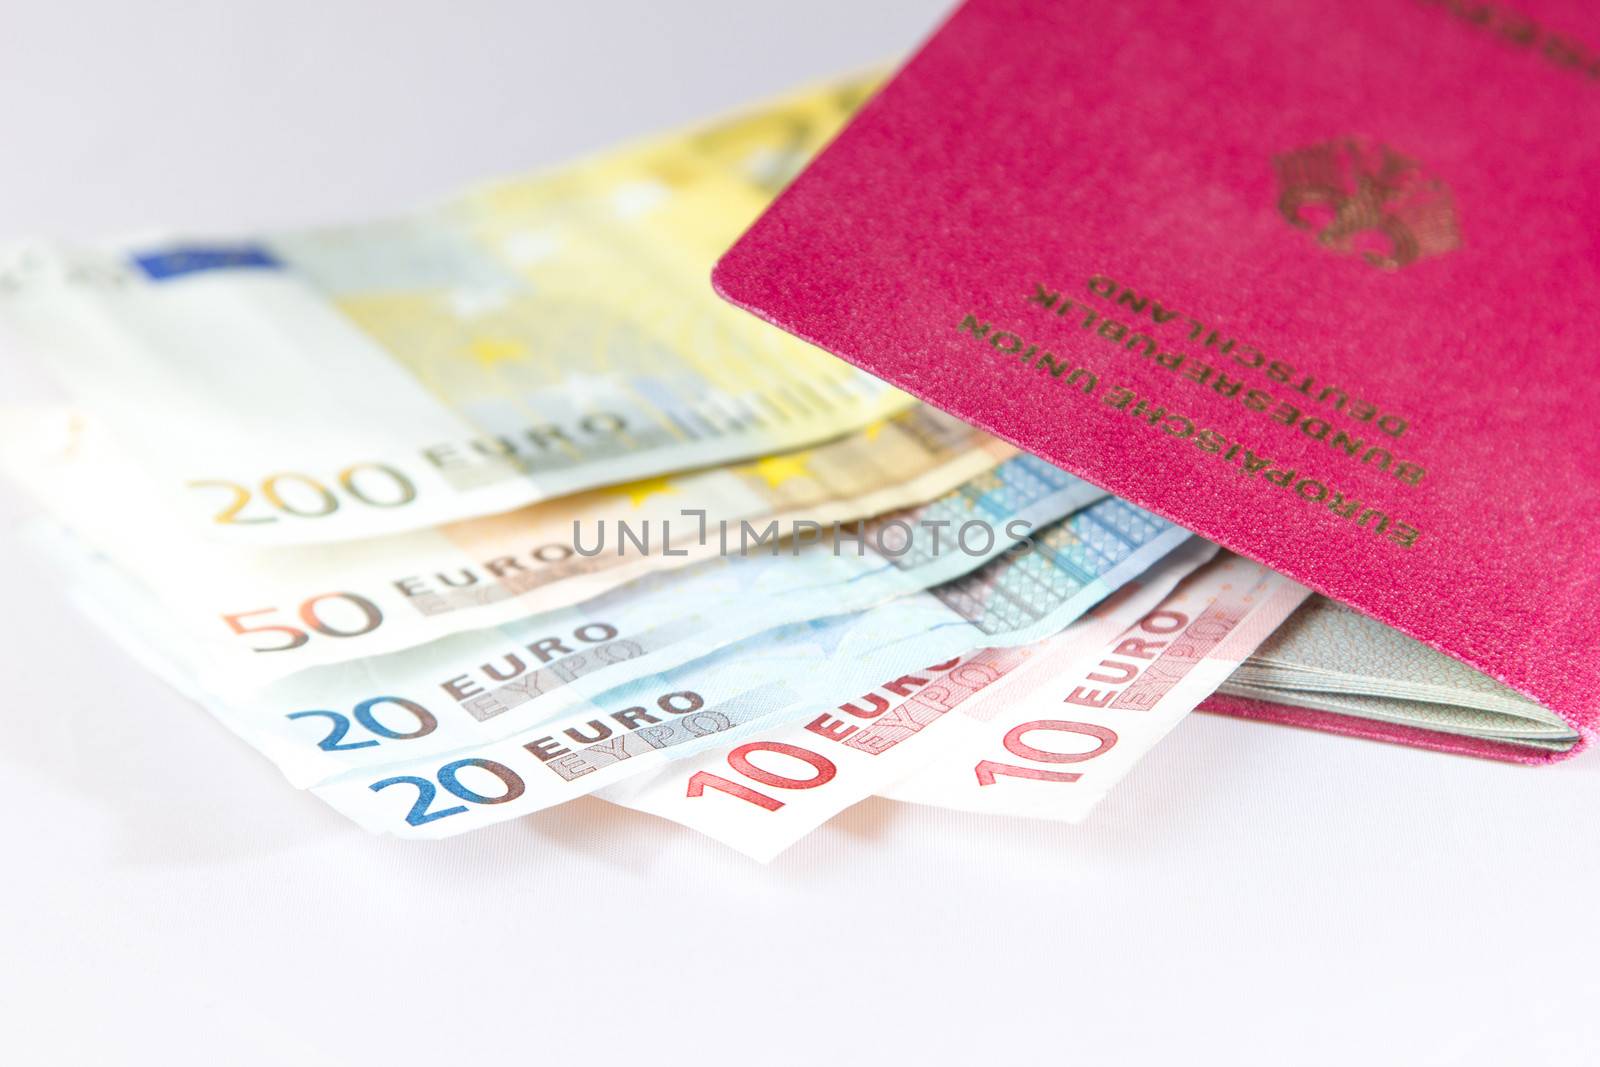 Euro Notes lying in the european passport from germany by Cursedsenses